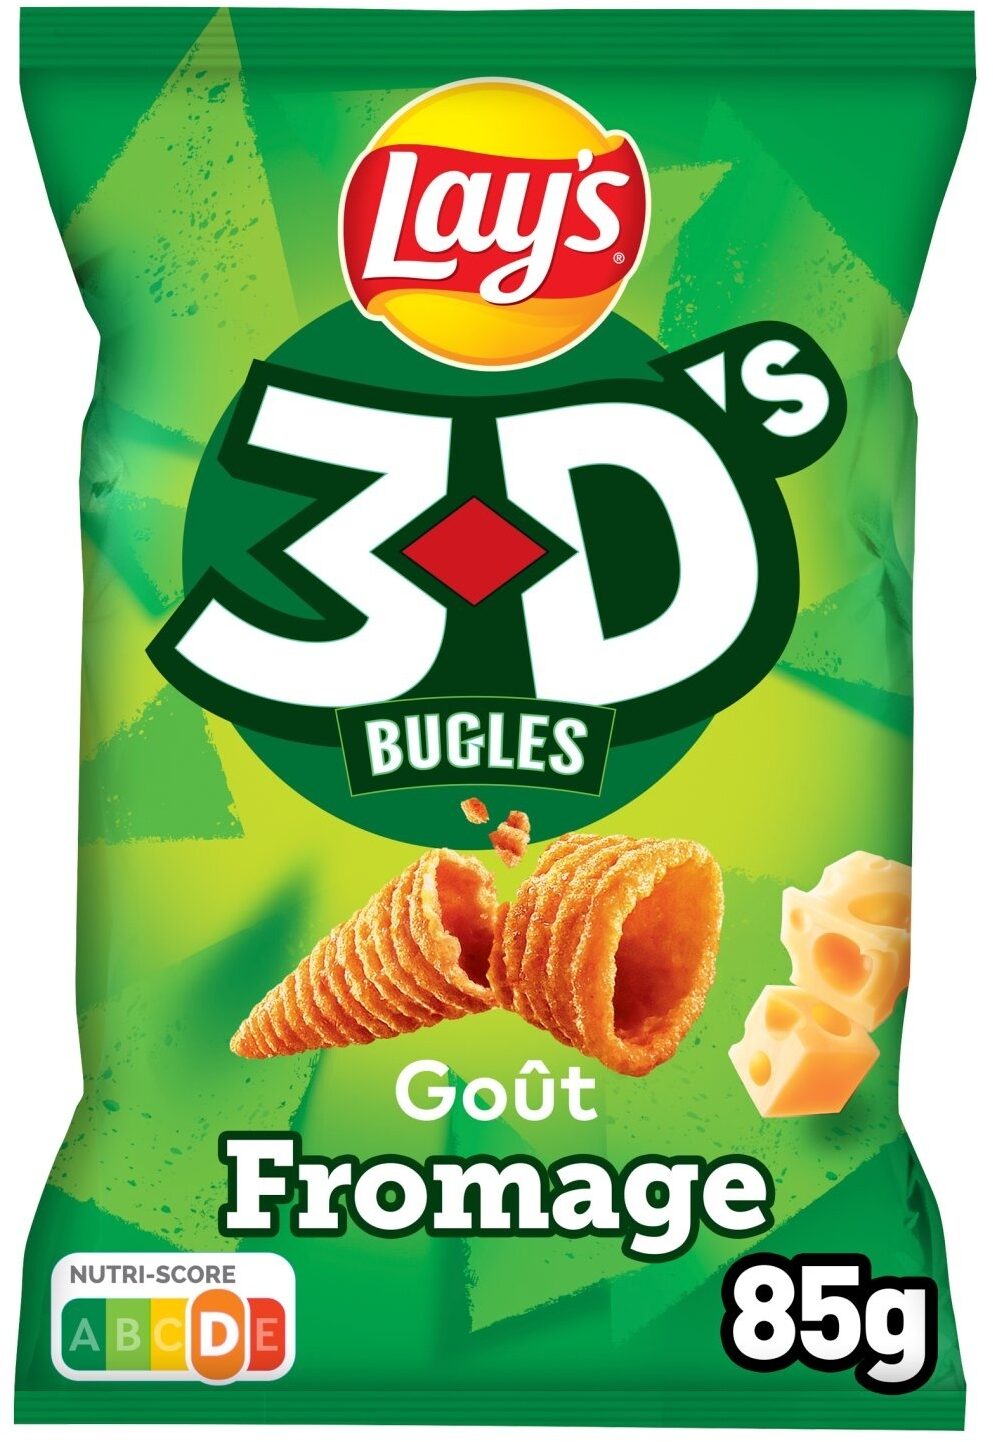 3D's Bugles goût fromage - Product - fr